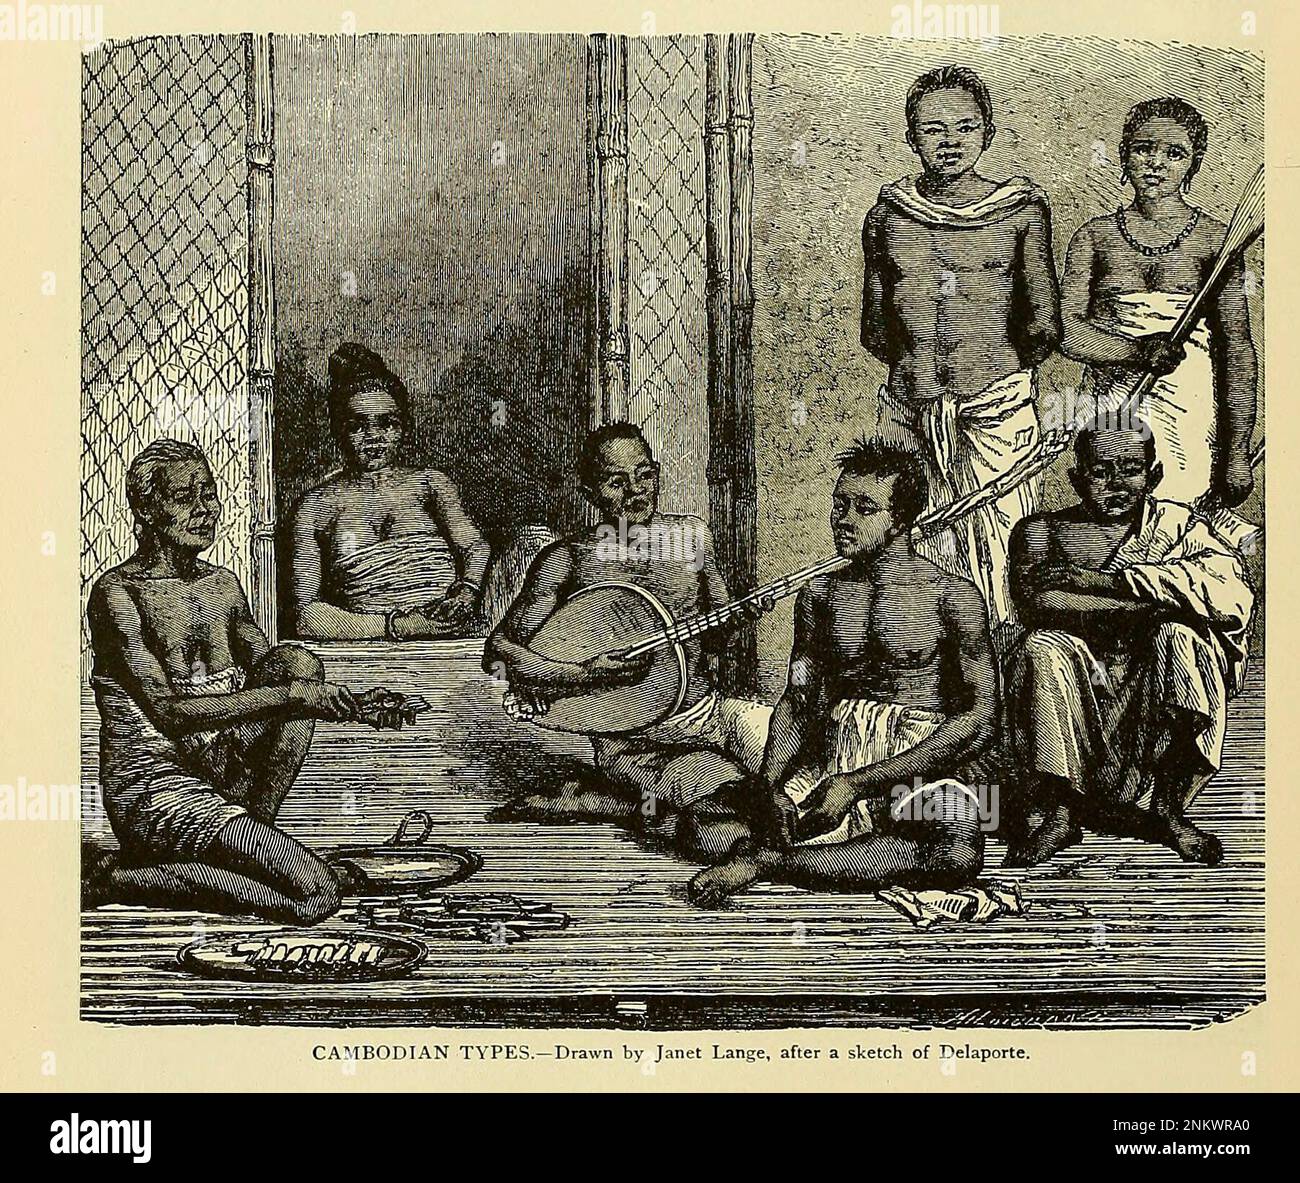 Native Cambodians Drawn by Janet Lange after a sketch of Delaporte Book XX Indo-China from Cyclopedia universal history : embracing the most complete and recent presentation of the subject in two principal parts or divisions of more than six thousand pages by John Clark Ridpath, 1840-1900 Publication date 1895 Publisher Boston : Balch Bros. Volume 6 History of Man and Mankind Stock Photo